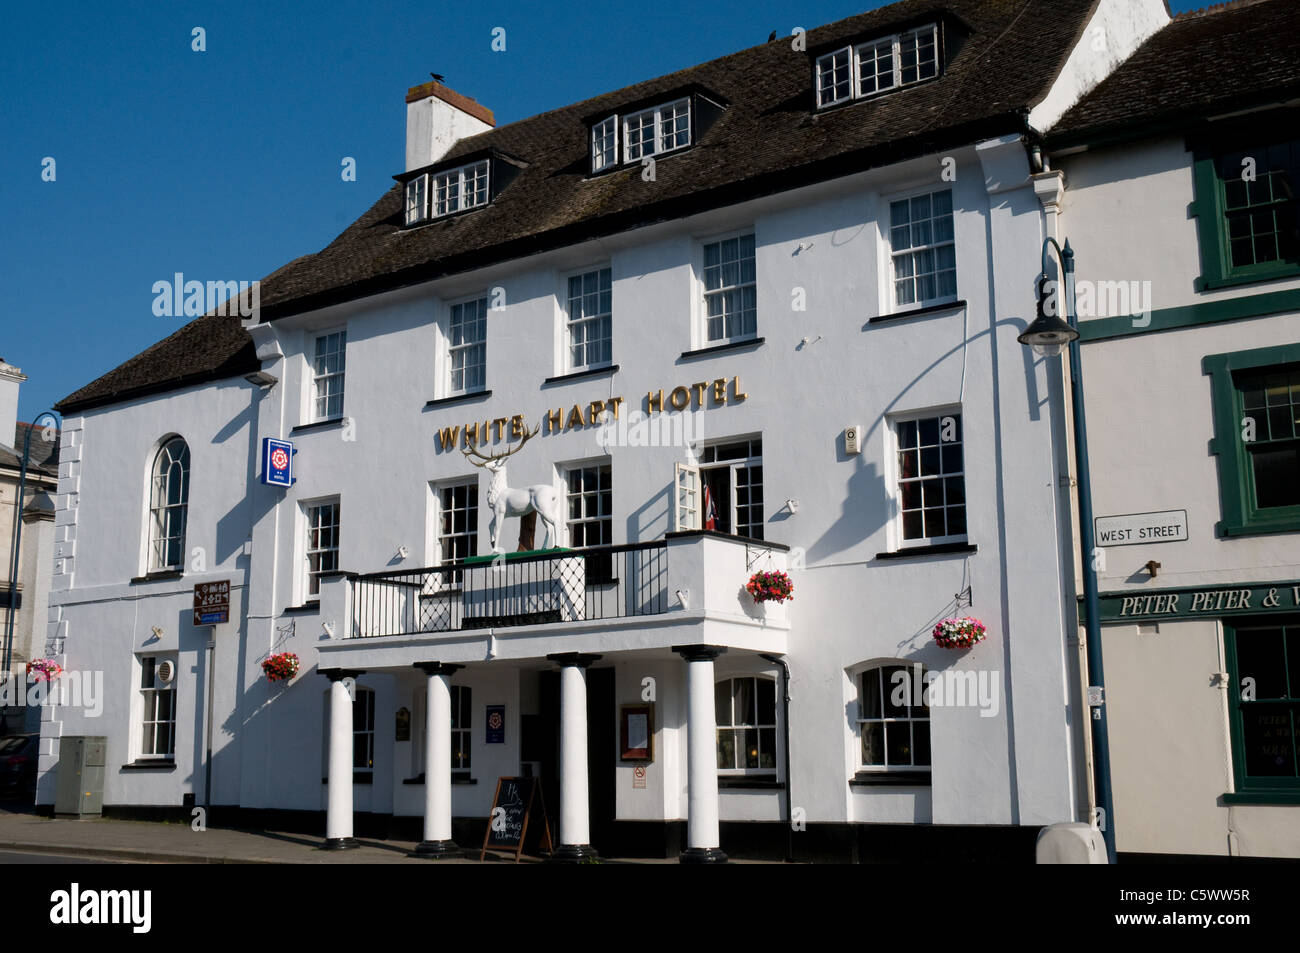 The White Hart Hotel is situated in the center of Okehampton and features a model of a white stag above the main entrance. Stock Photo